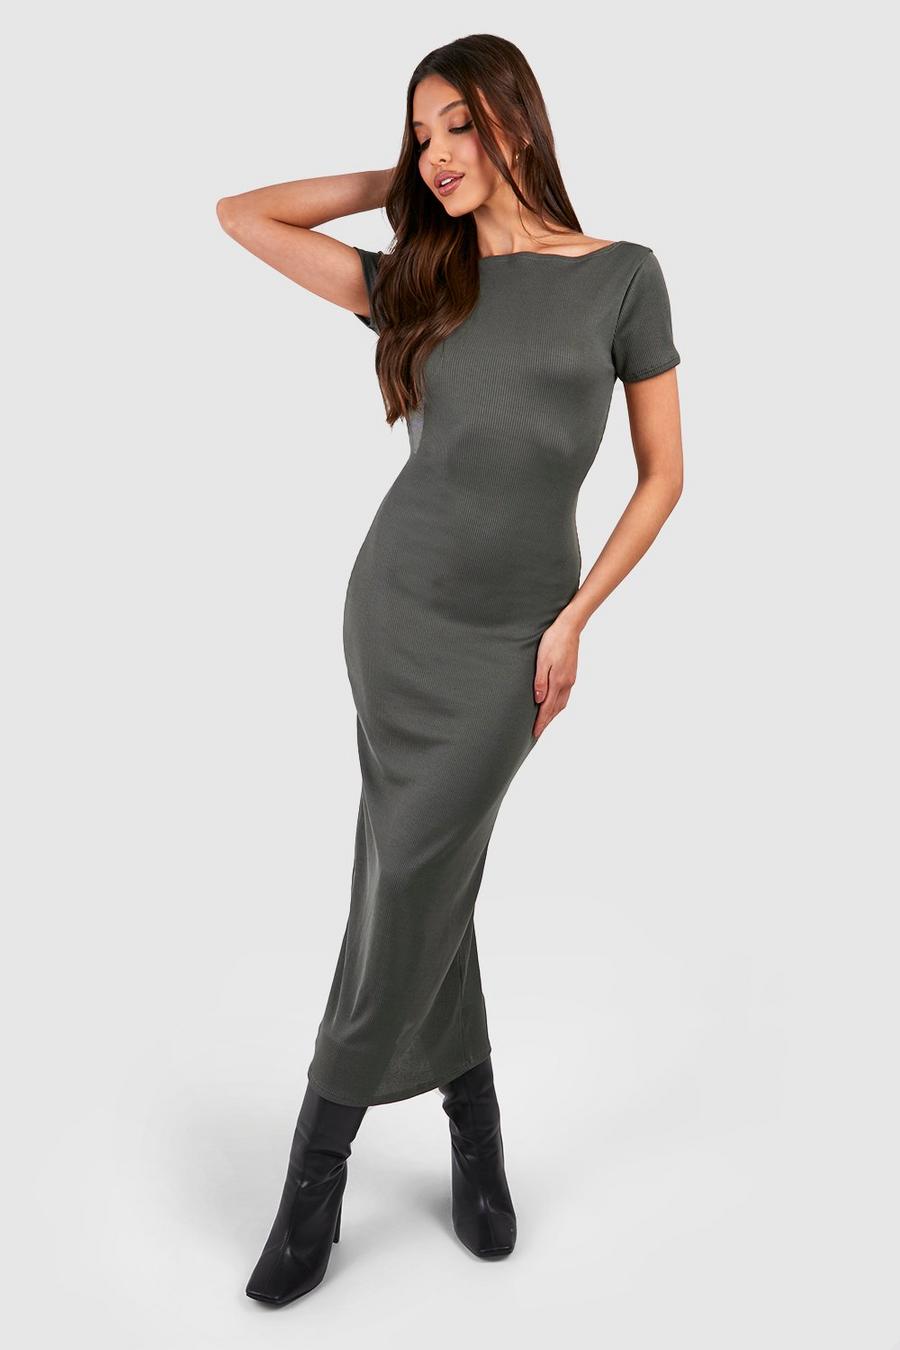 Short Sleeve Backless Dresses for Women - Up to 76% off